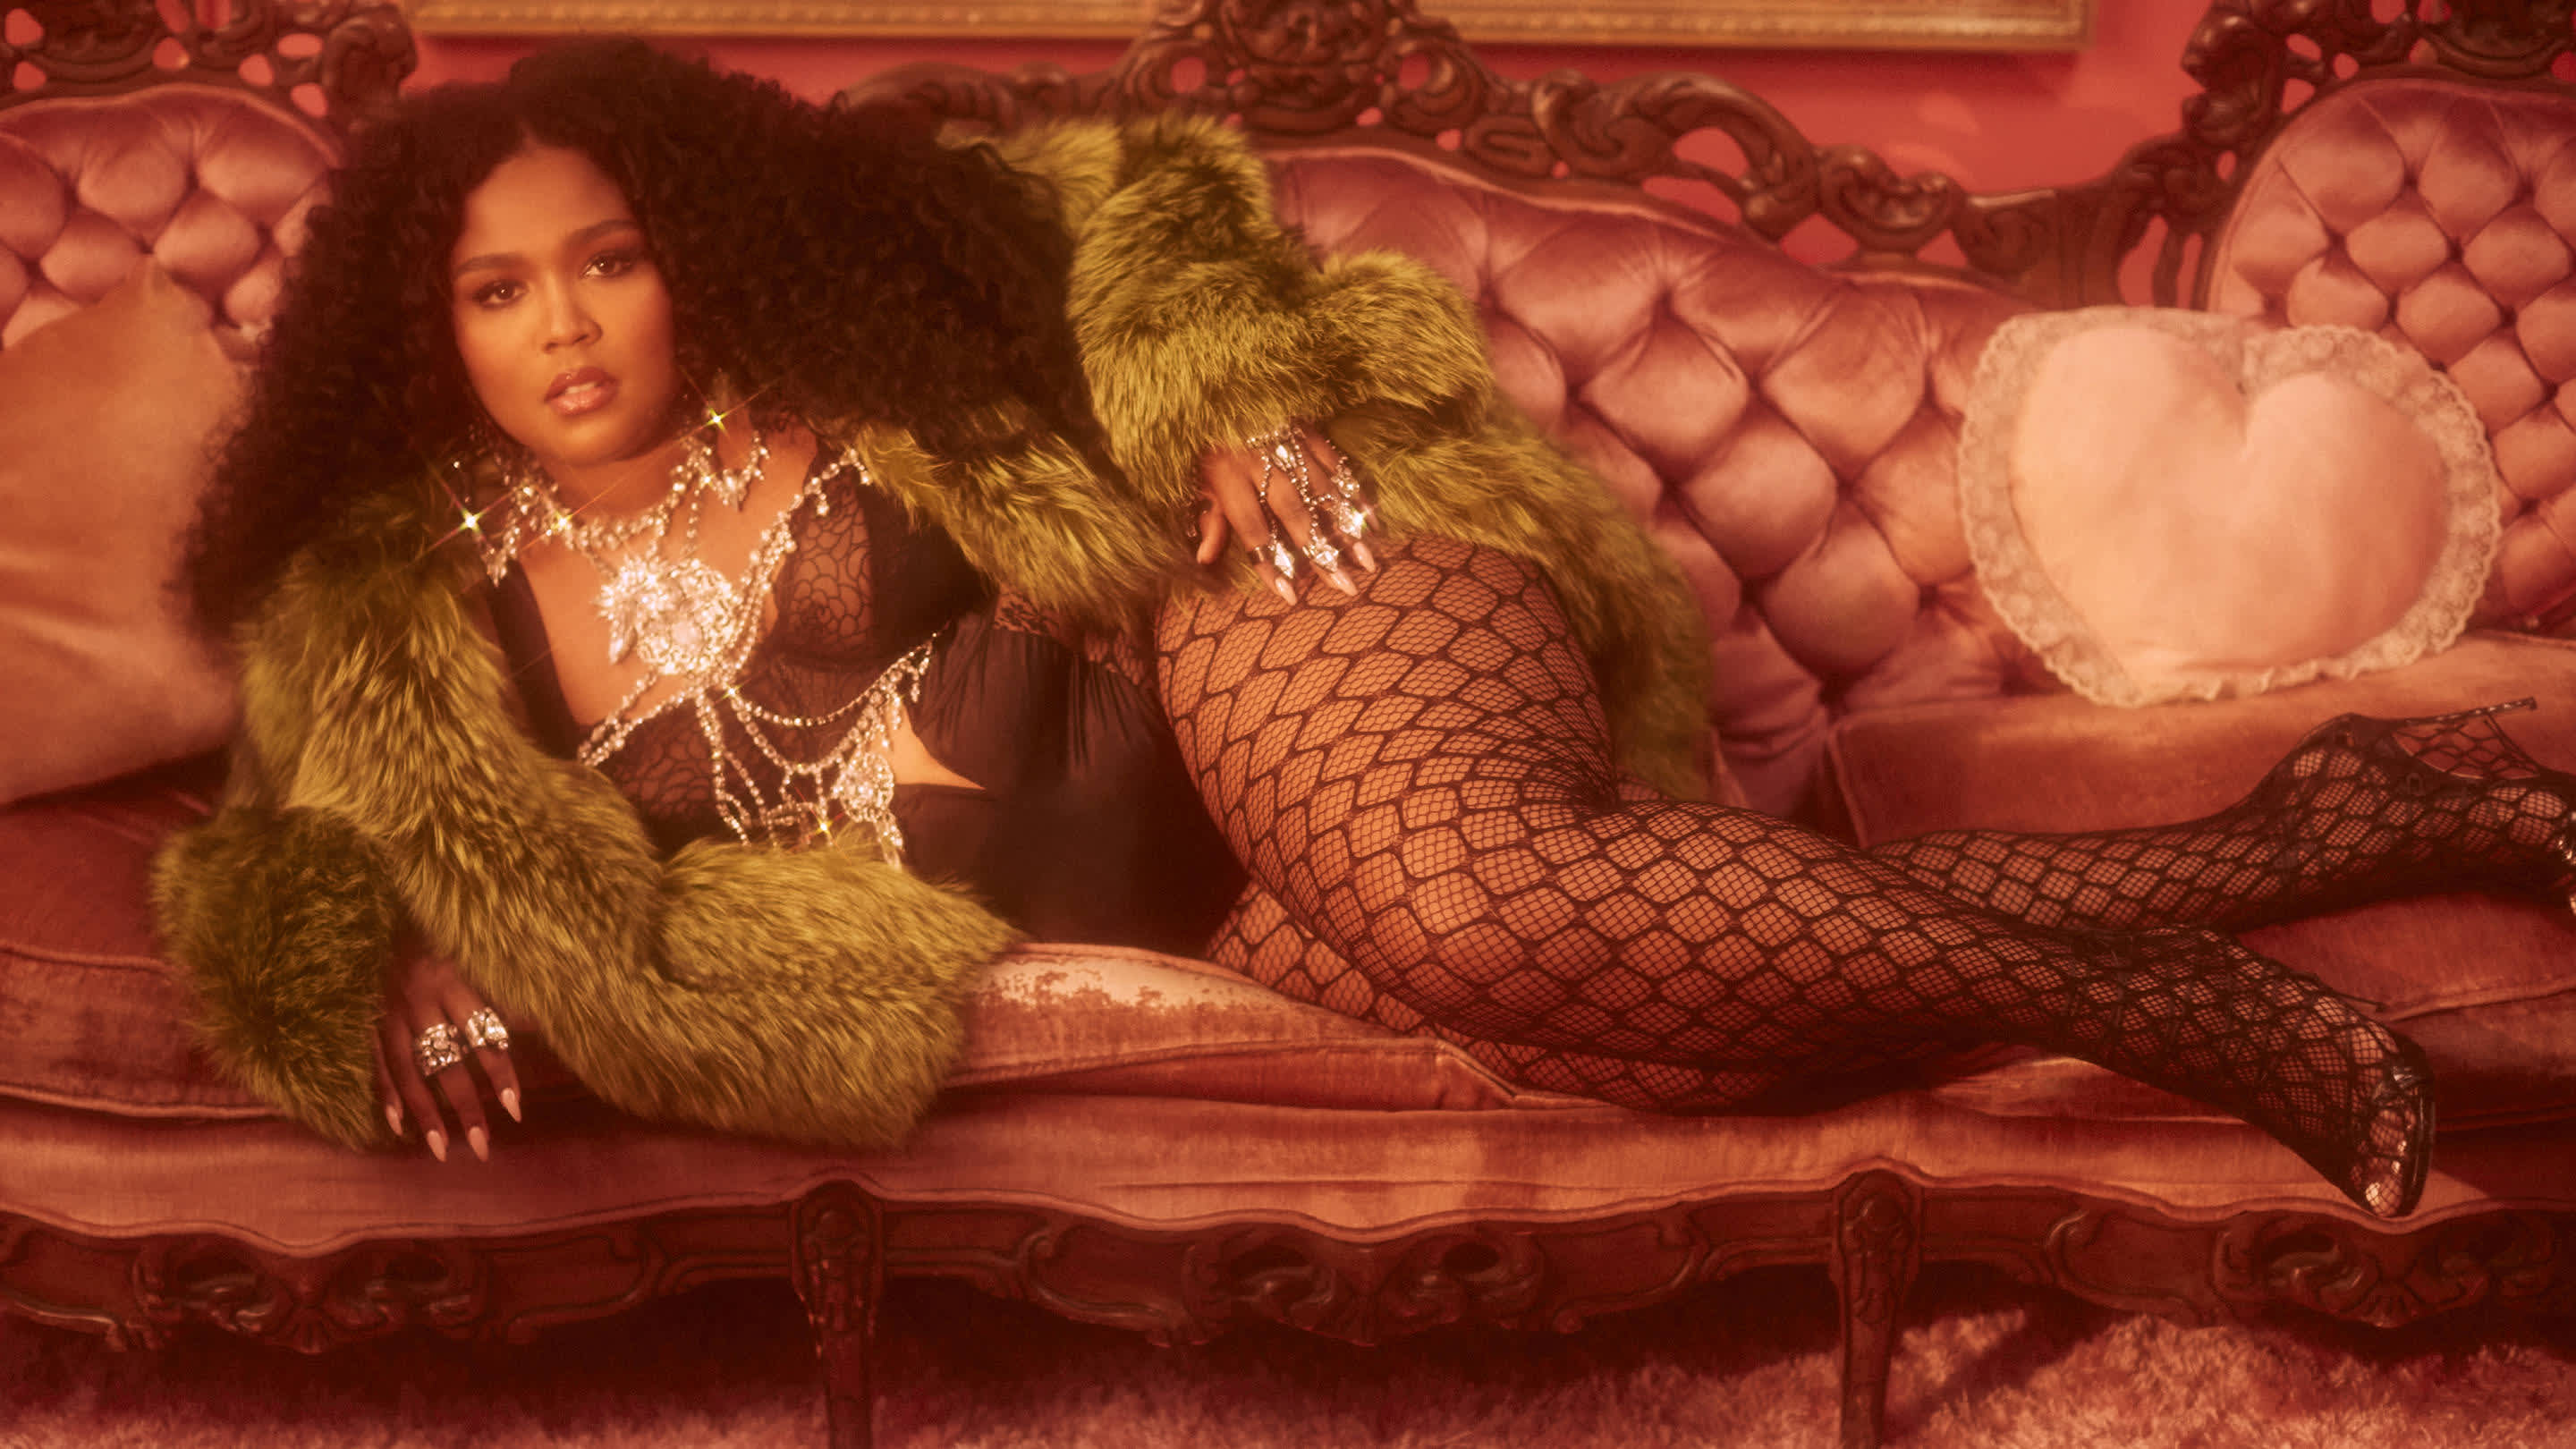 Playboy New Sexy Couples Photoshoots - Lizzo the Incomparable